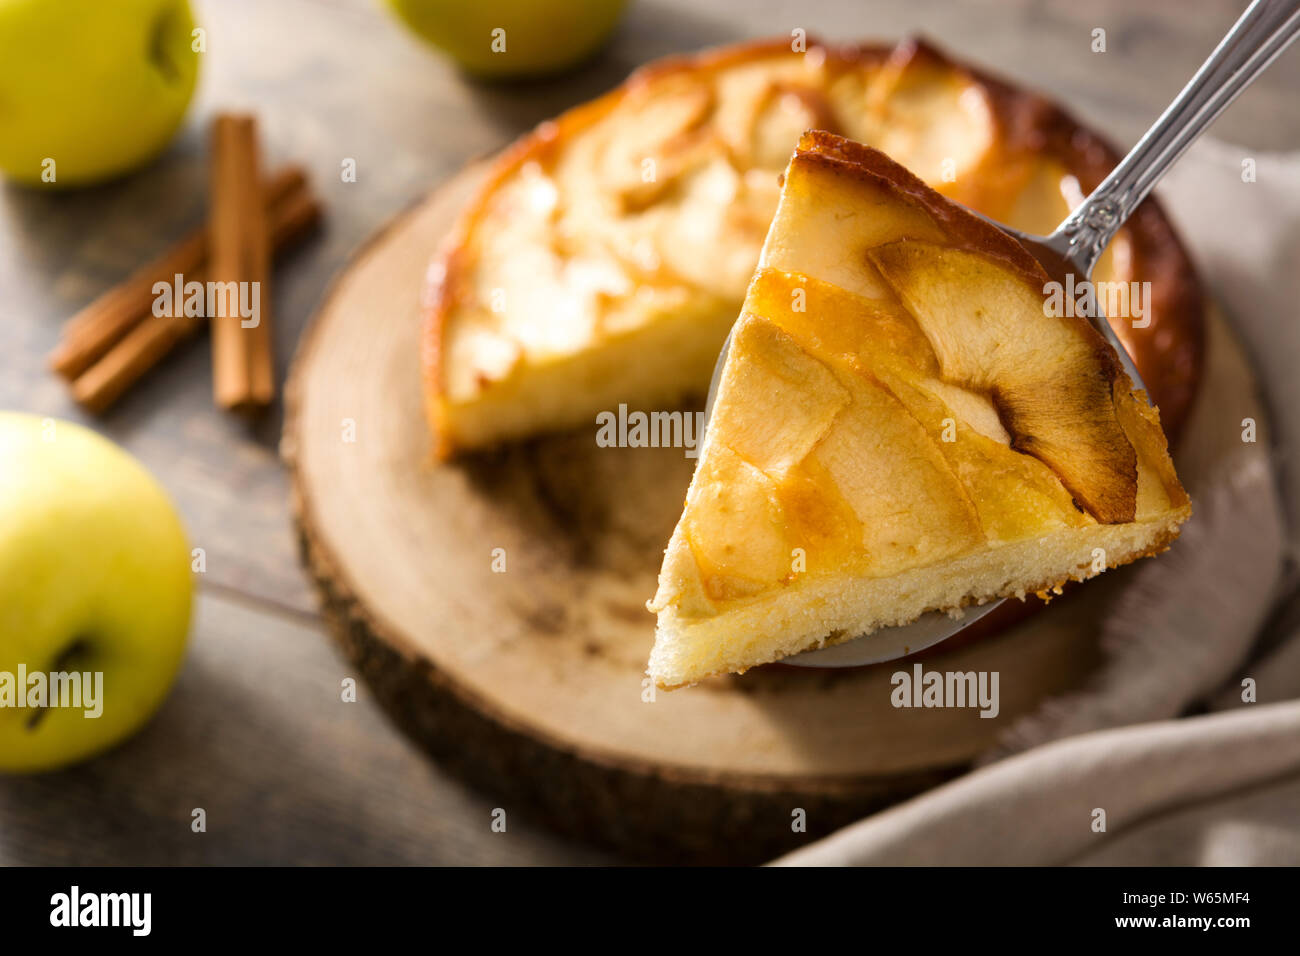 Homemade apple pie on wooden table. Stock Photo